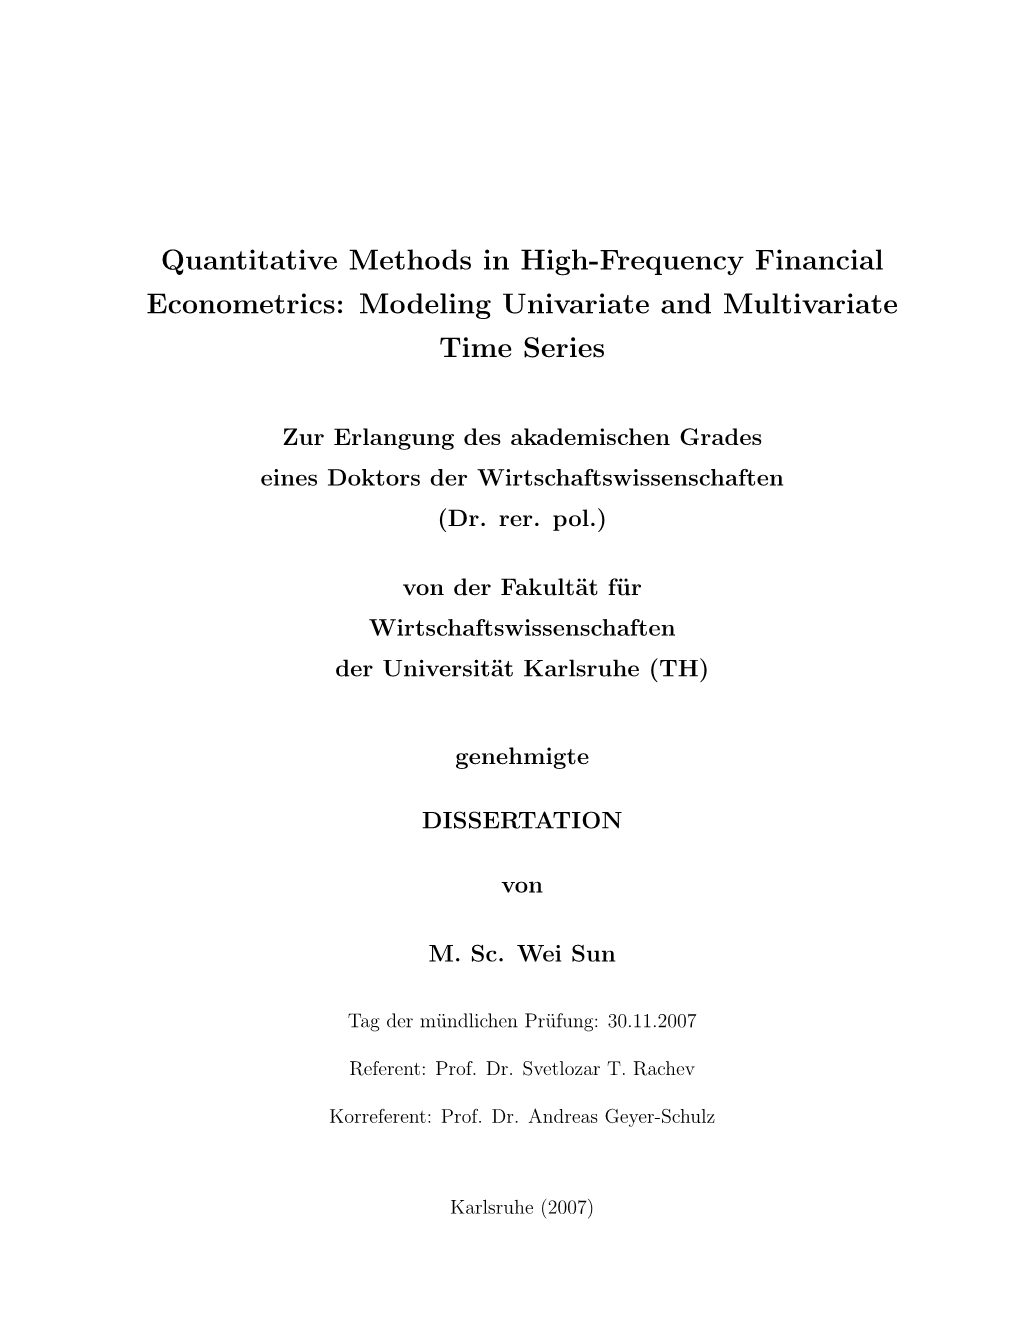 Quantitative Methods in High-Frequency Financial Econometrics: Modeling Univariate and Multivariate Time Series